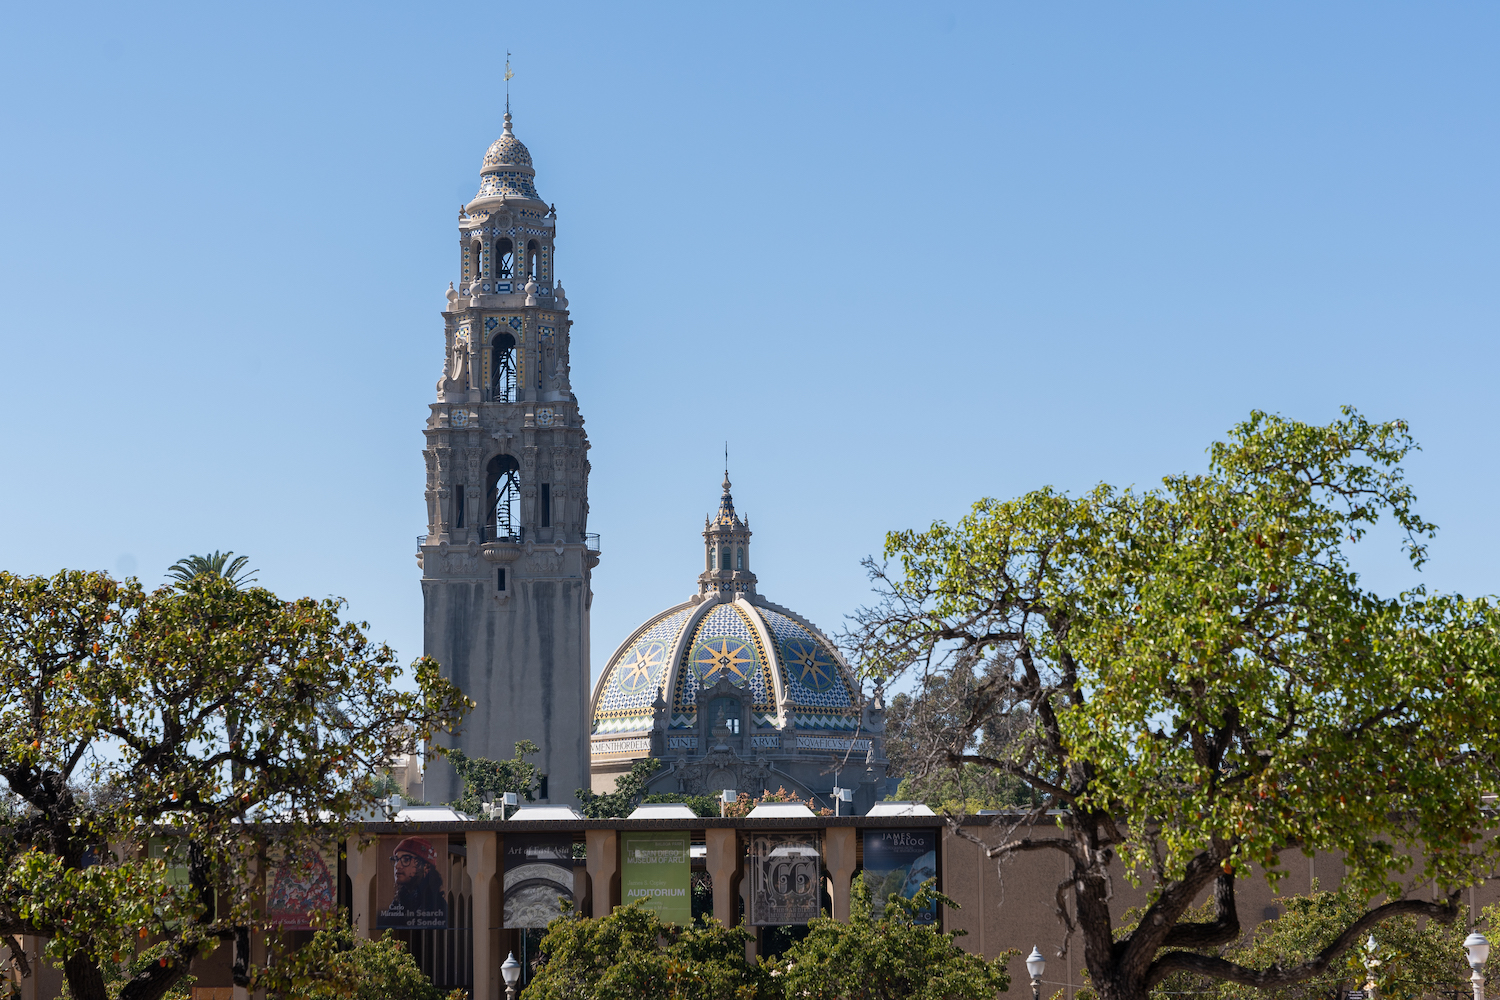 San Diego's Balboa Park which is home to various museums, parks, and other free family-friendly activities 